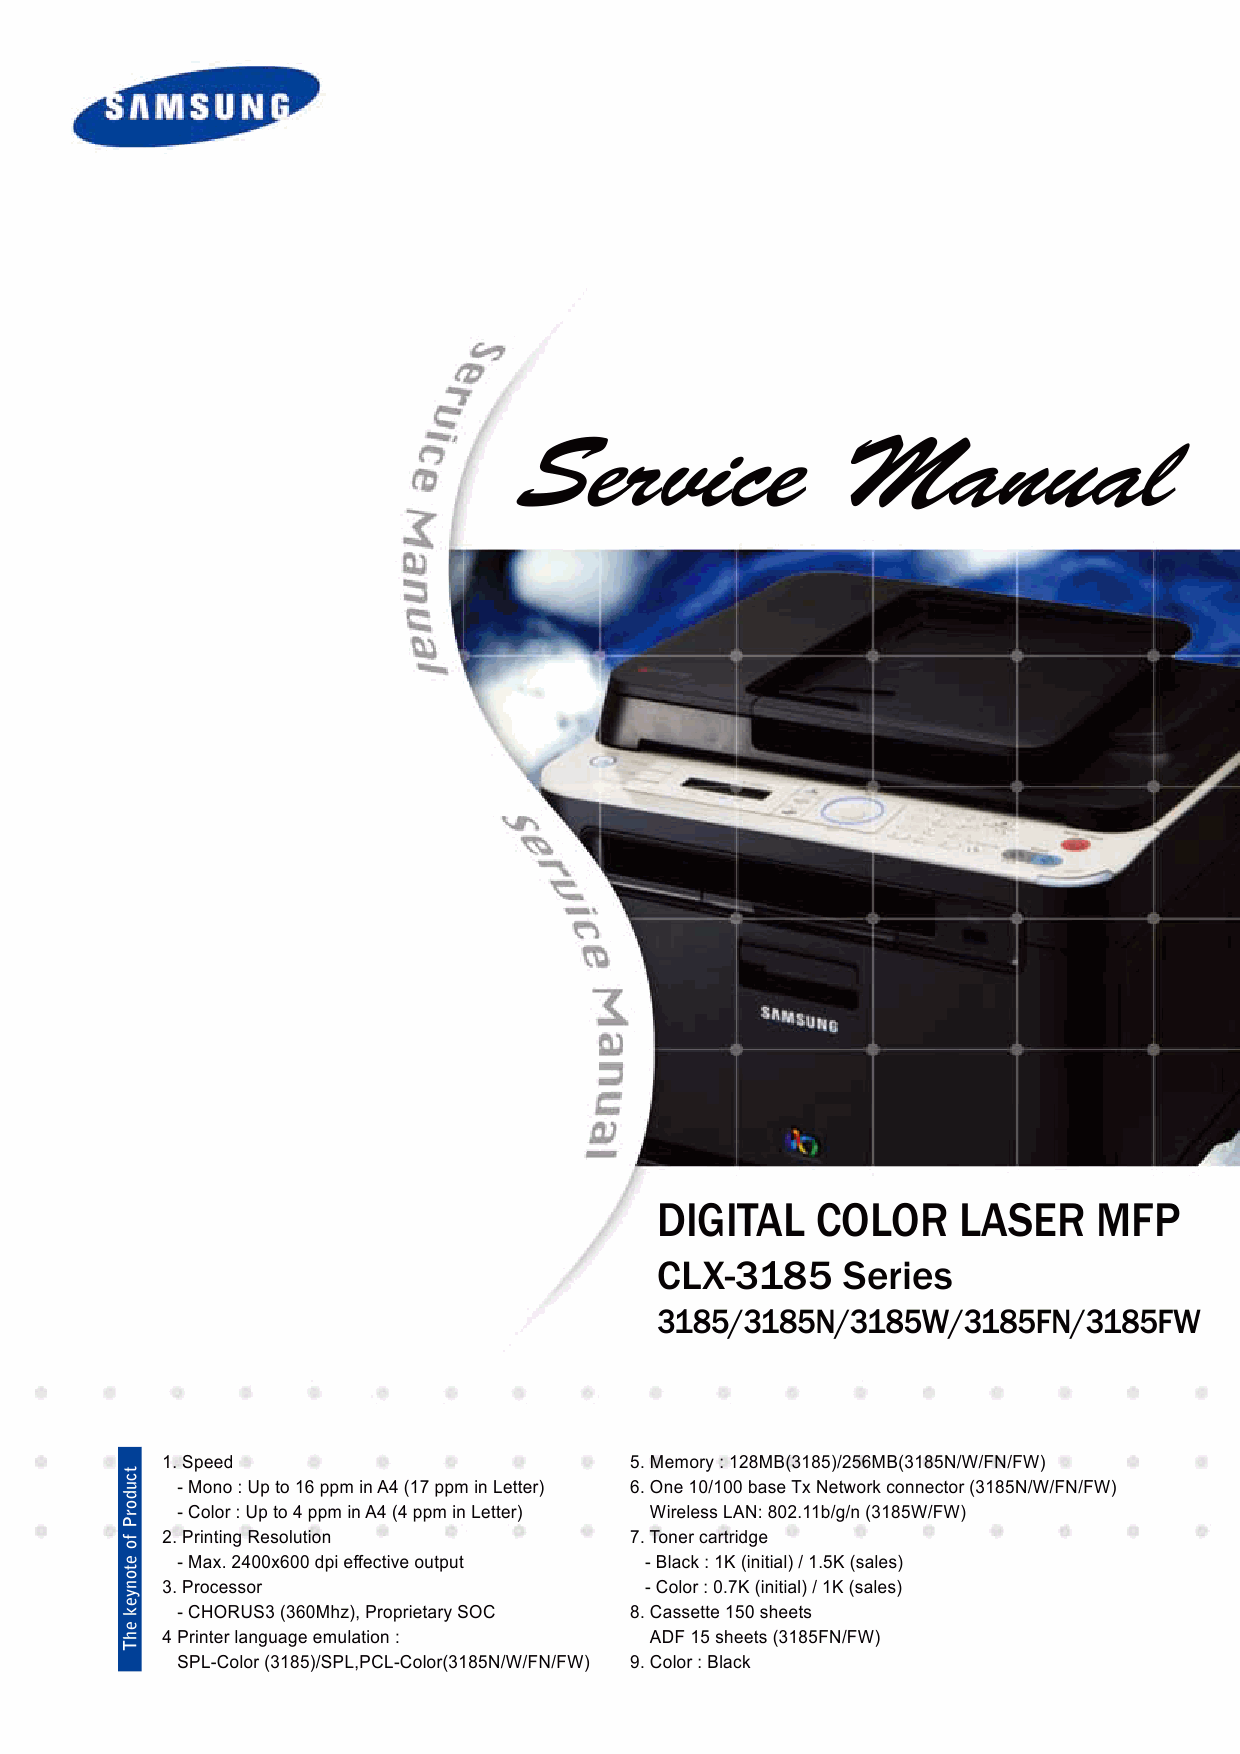 Samsung Digital-Color-Laser-MFP CLX-3185 Series N W FN FW Parts and Service Manual-1